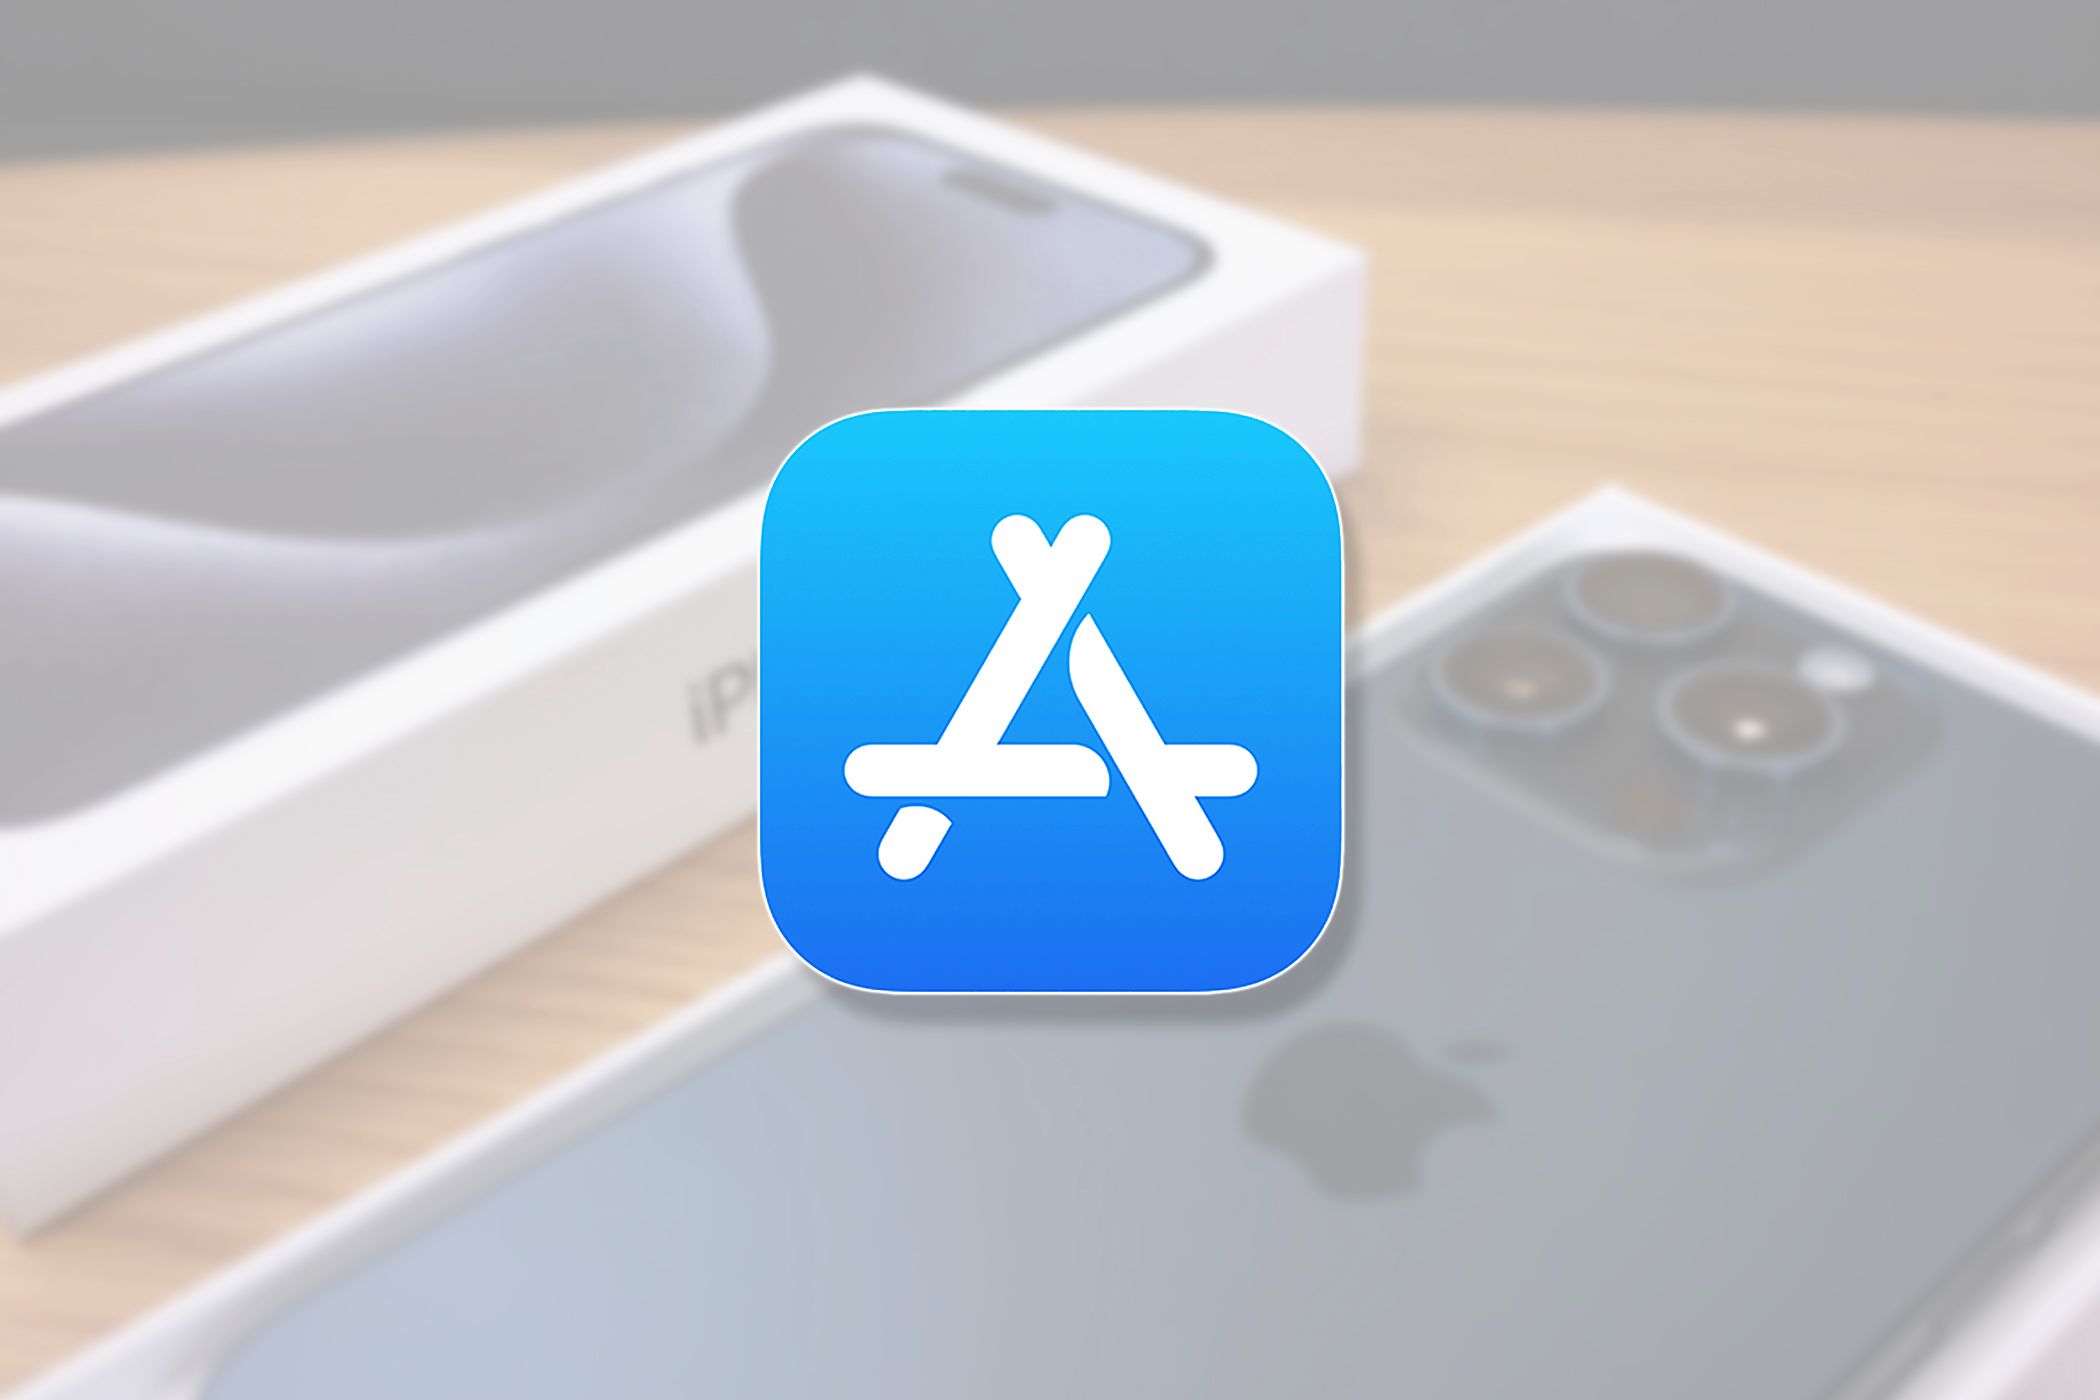 The Apple App Store icon over a photo of an iPhone.